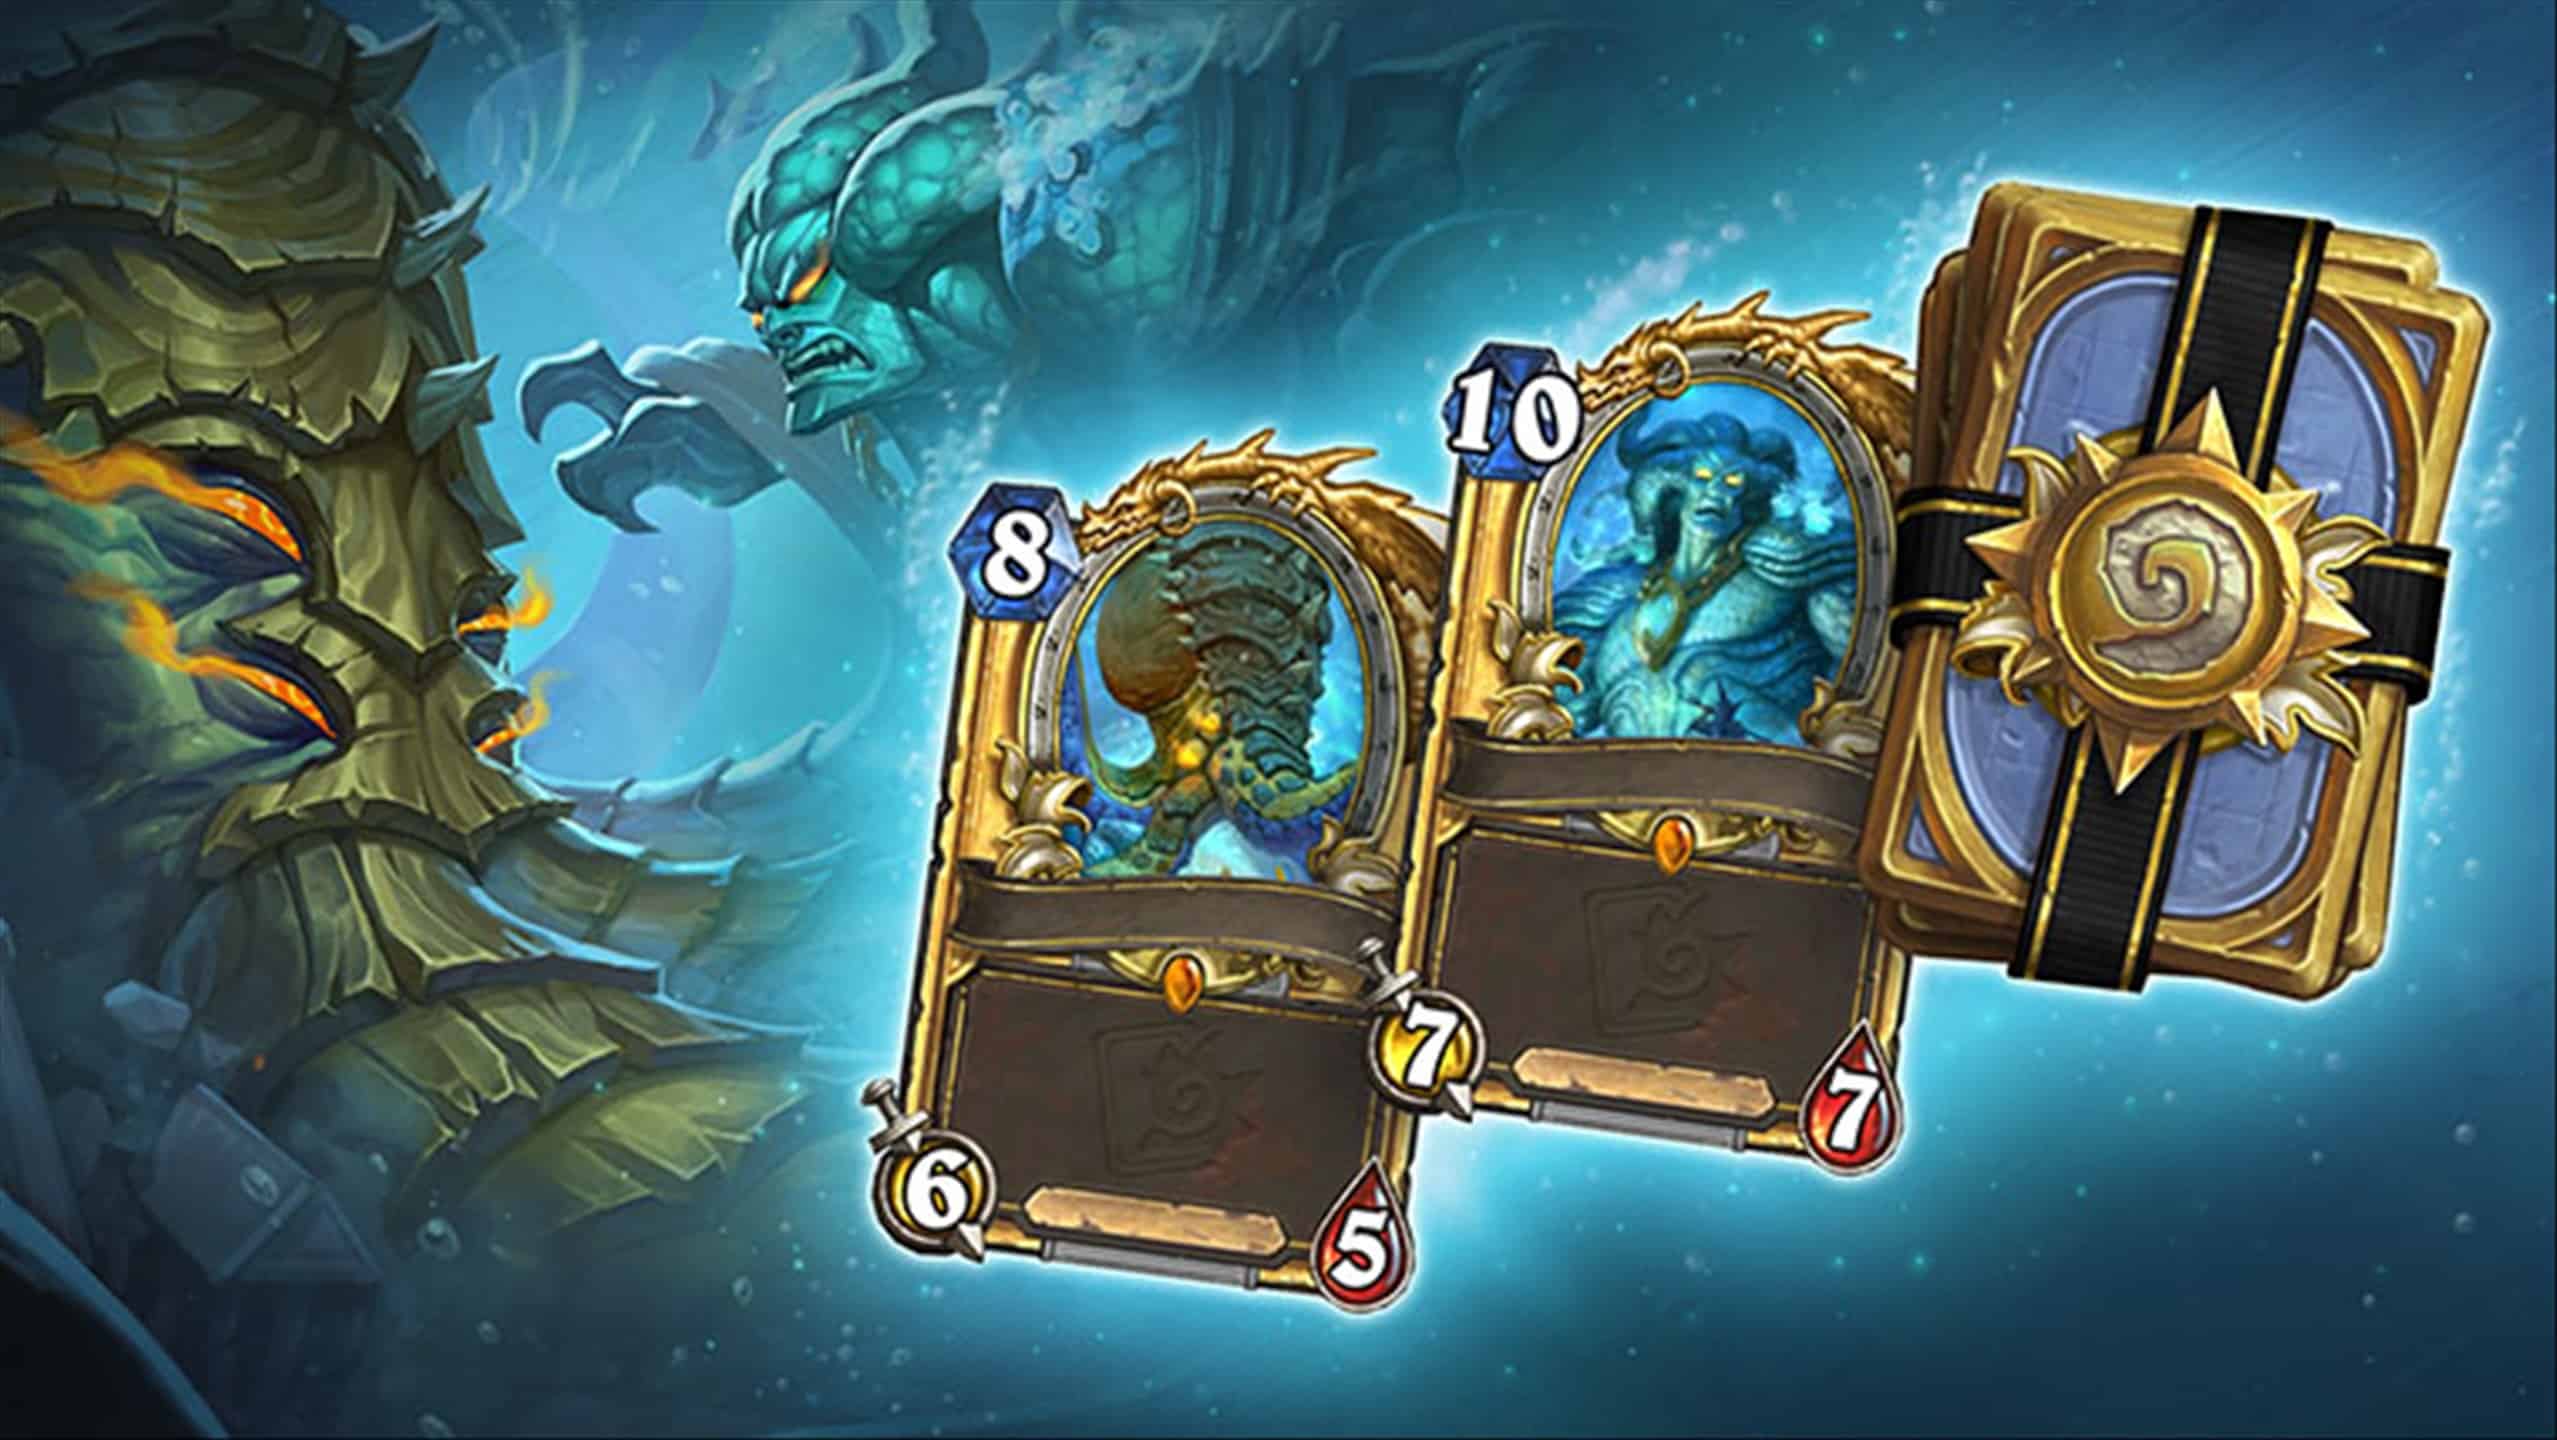 Hearthstone’s Throne of the Tides adds 35 new cards into the latest Voyage to the Sunken City expansion